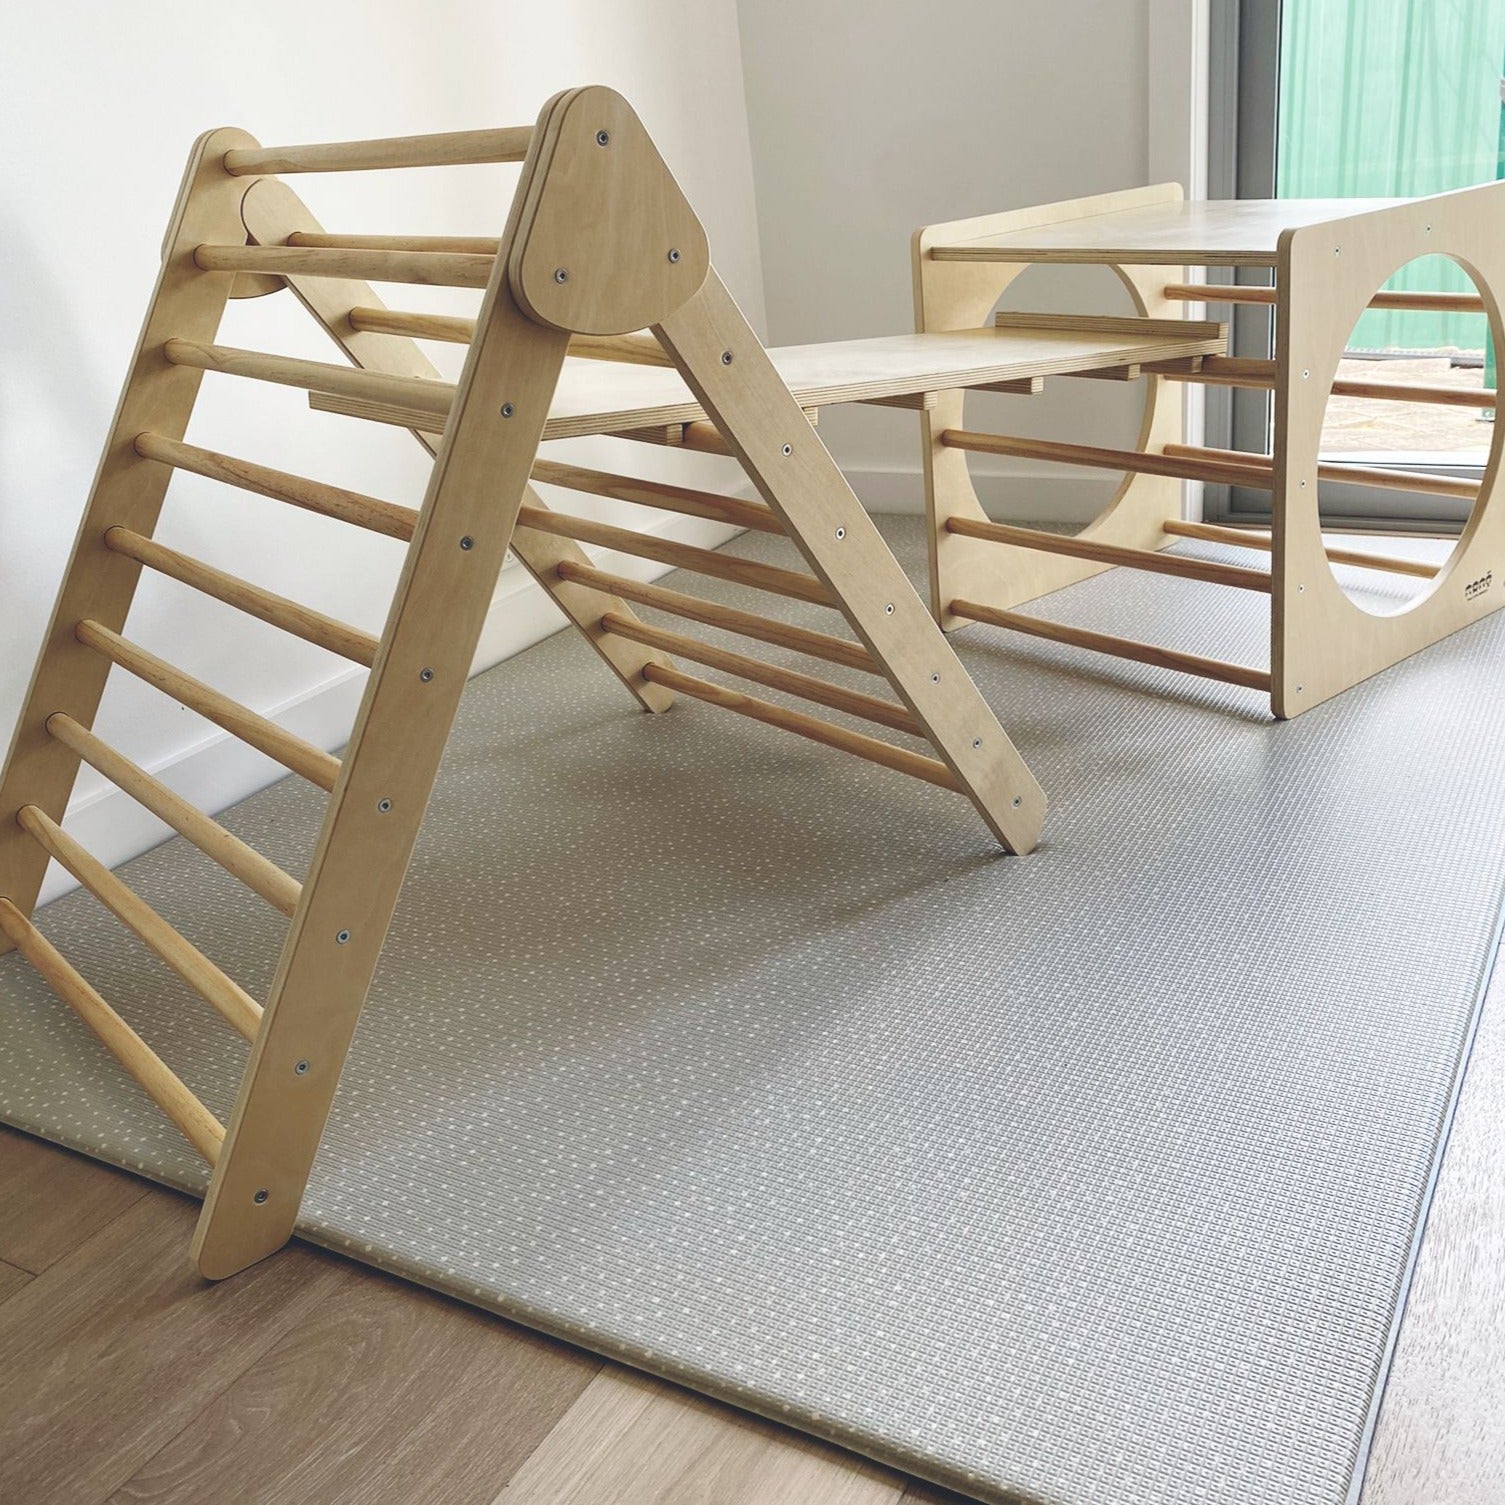 Image of a Pikler Triangle, Cube, and Ramp Bundle Set, showcasing the versatile play structures designed for developmental climbing and creative play for young children.